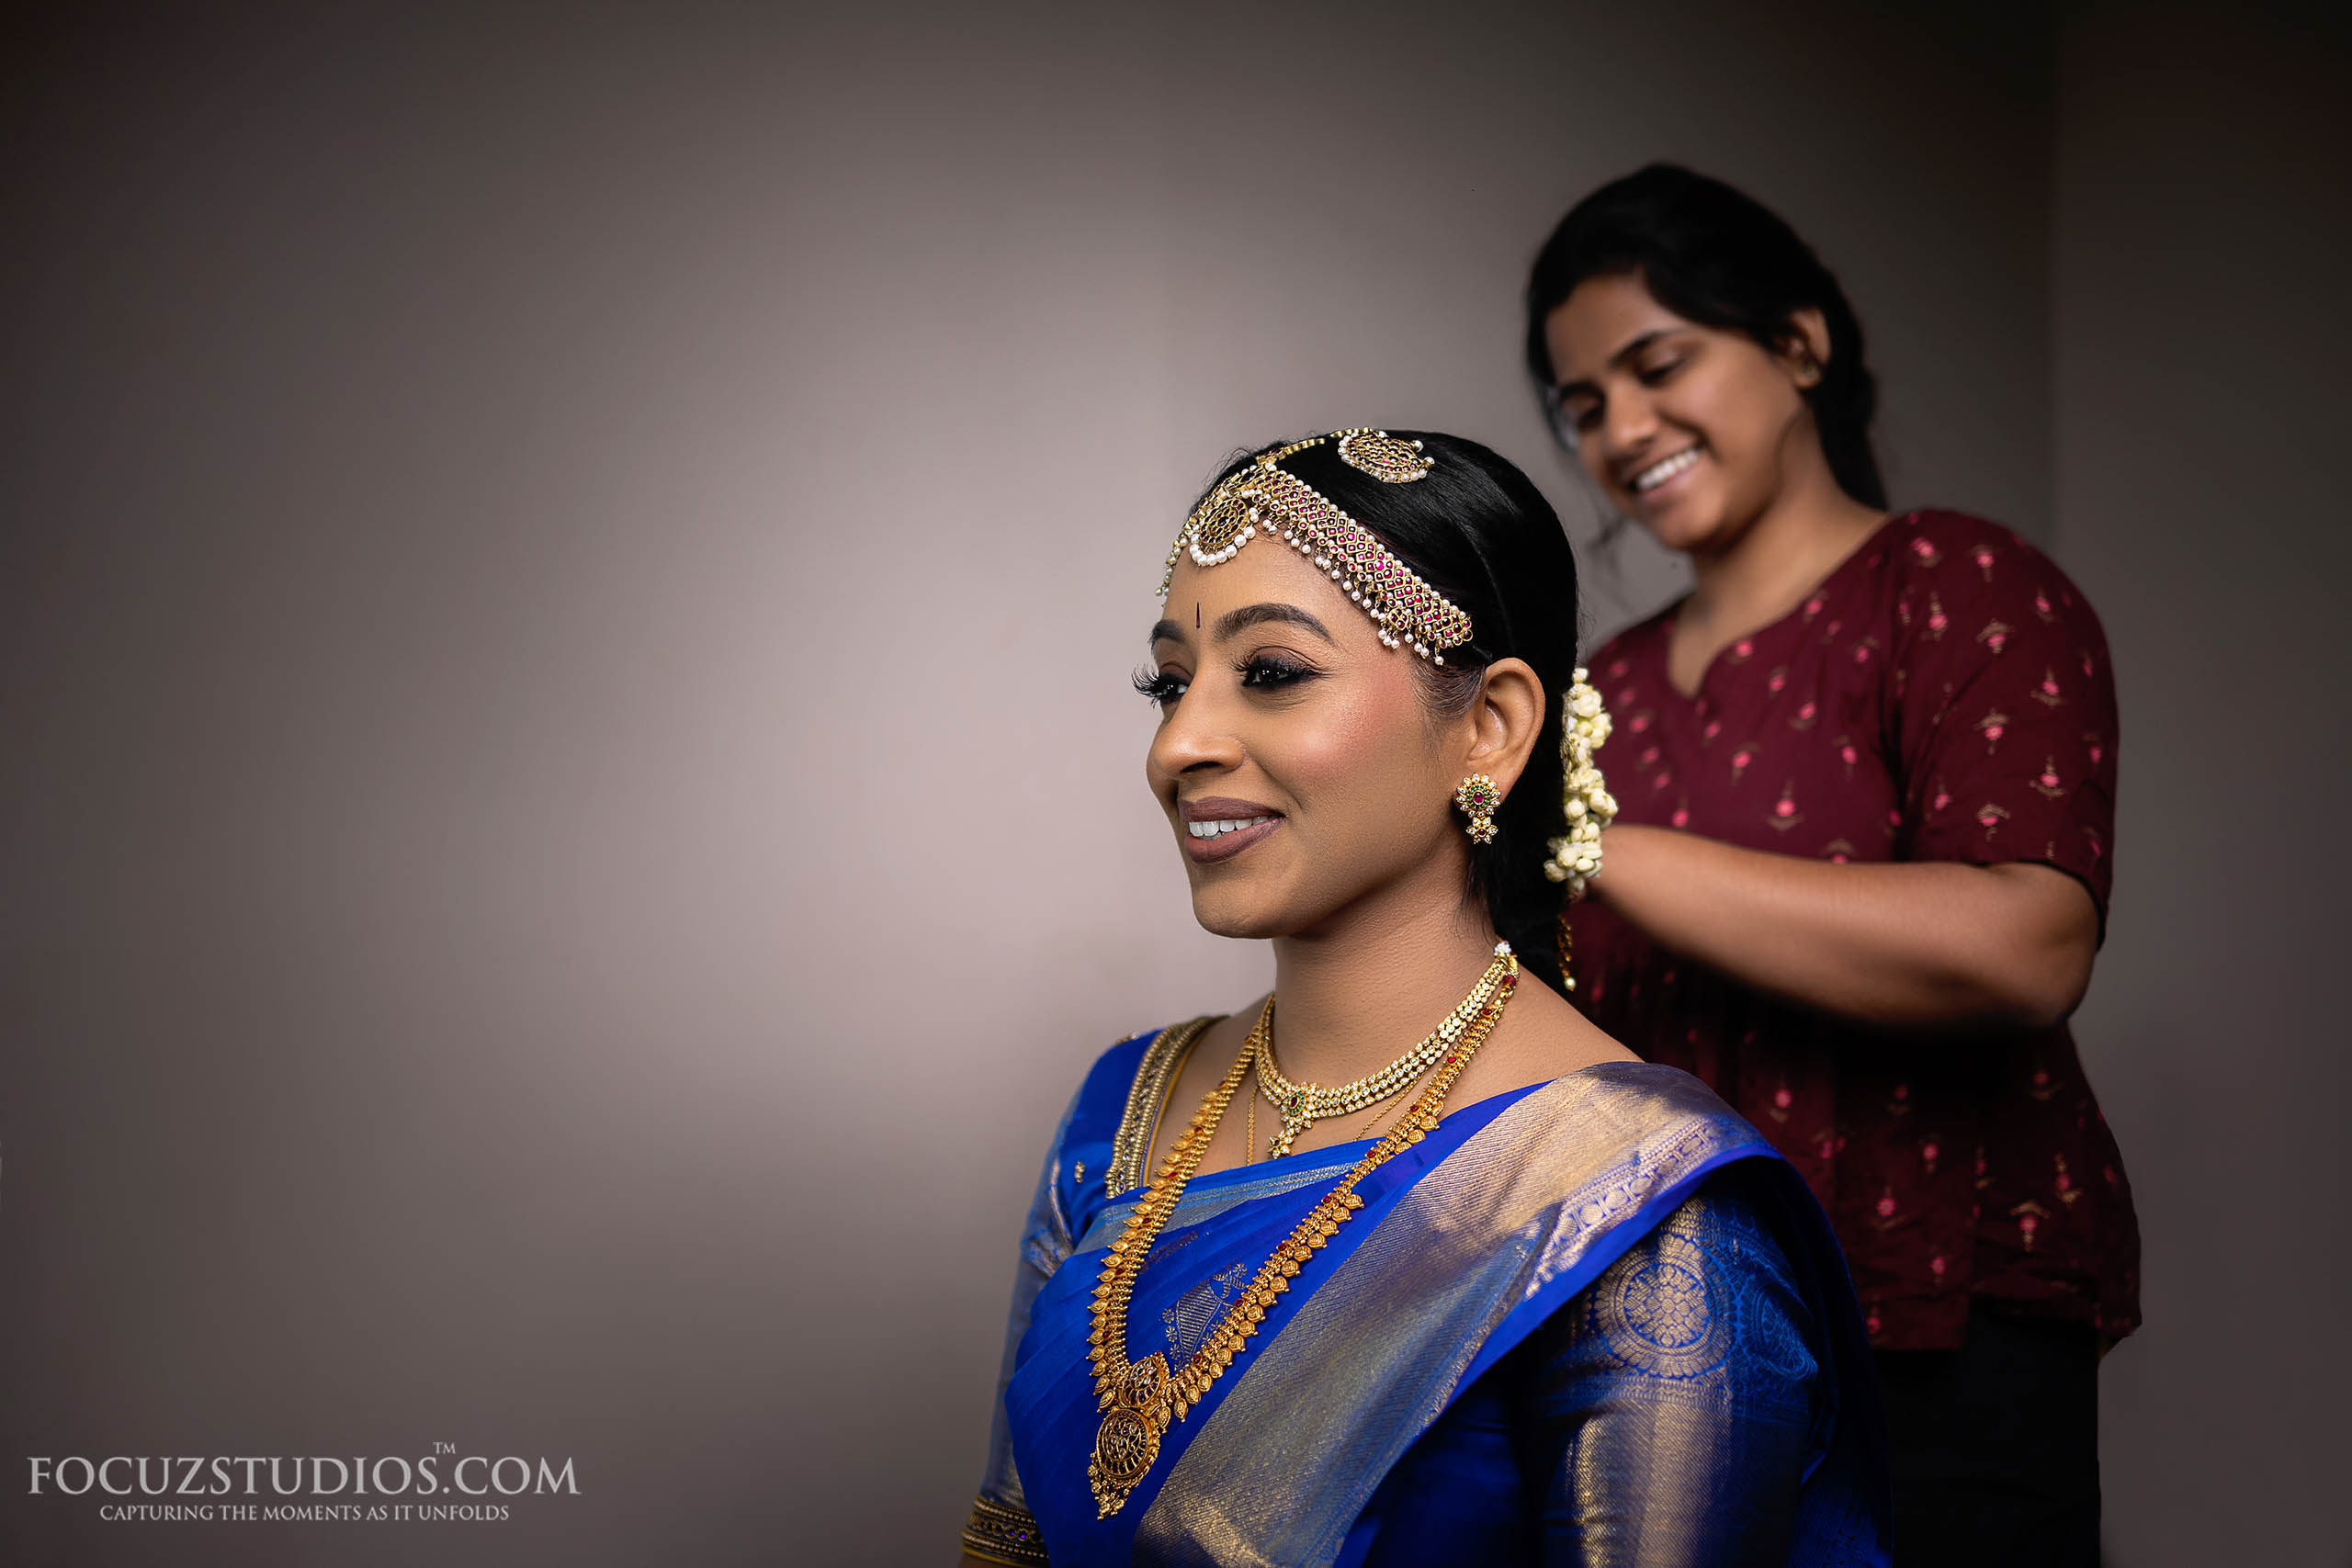 south-indian-bride-getting-ready-candid-wedding-photography-14